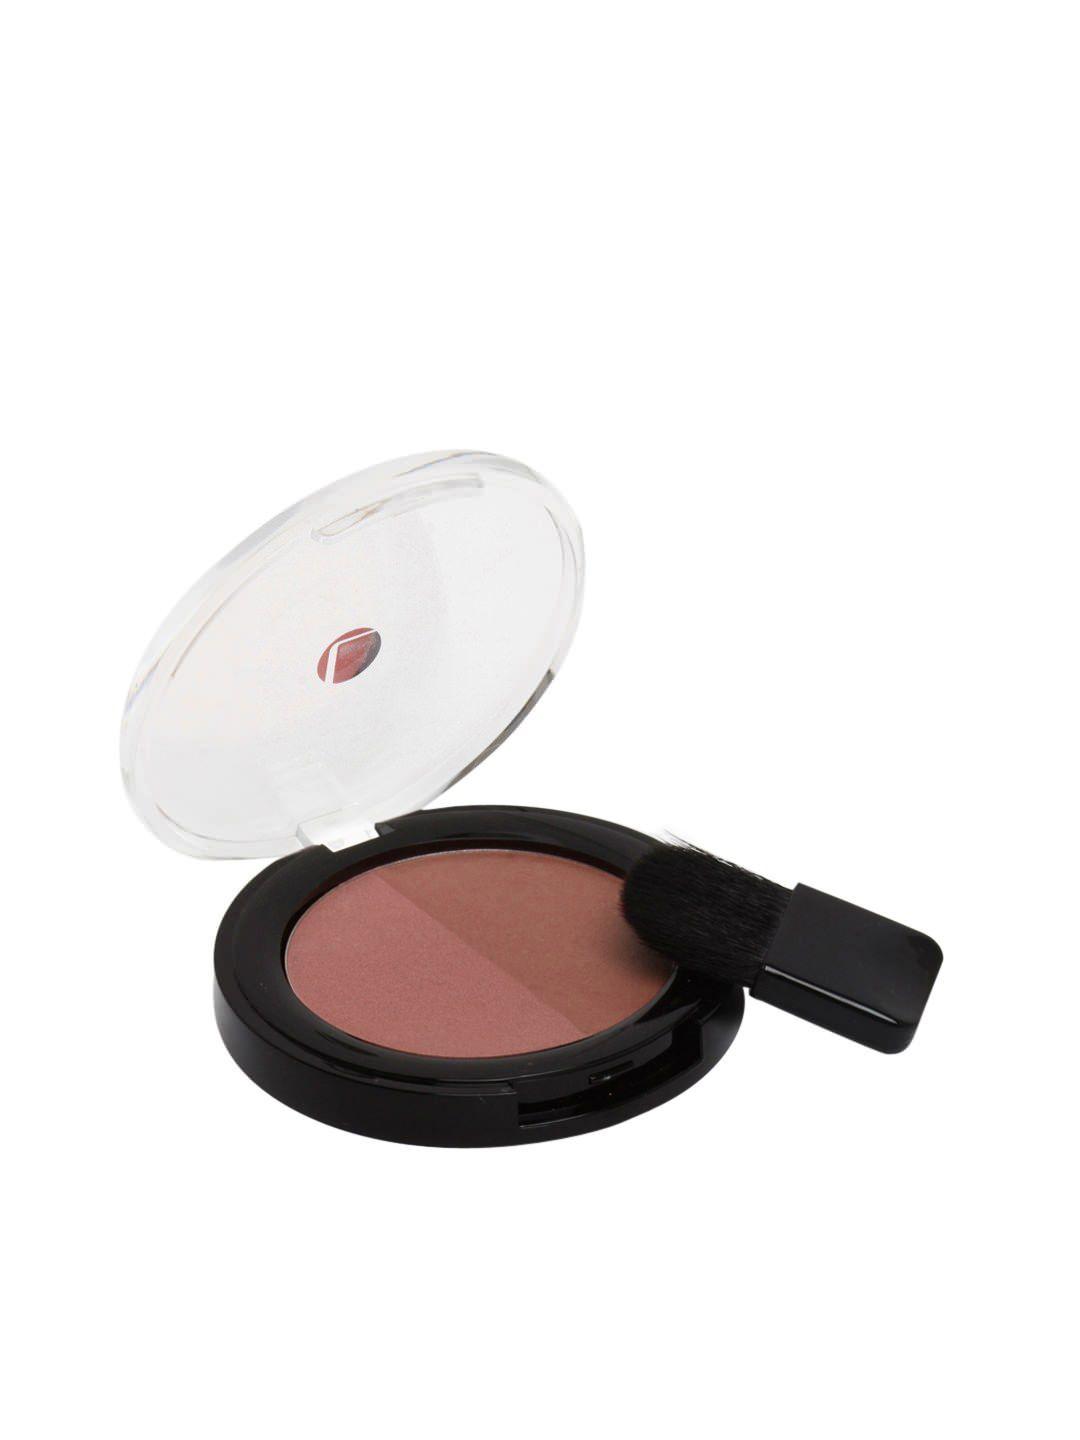 lakme absolute face stylist blush duos - rose